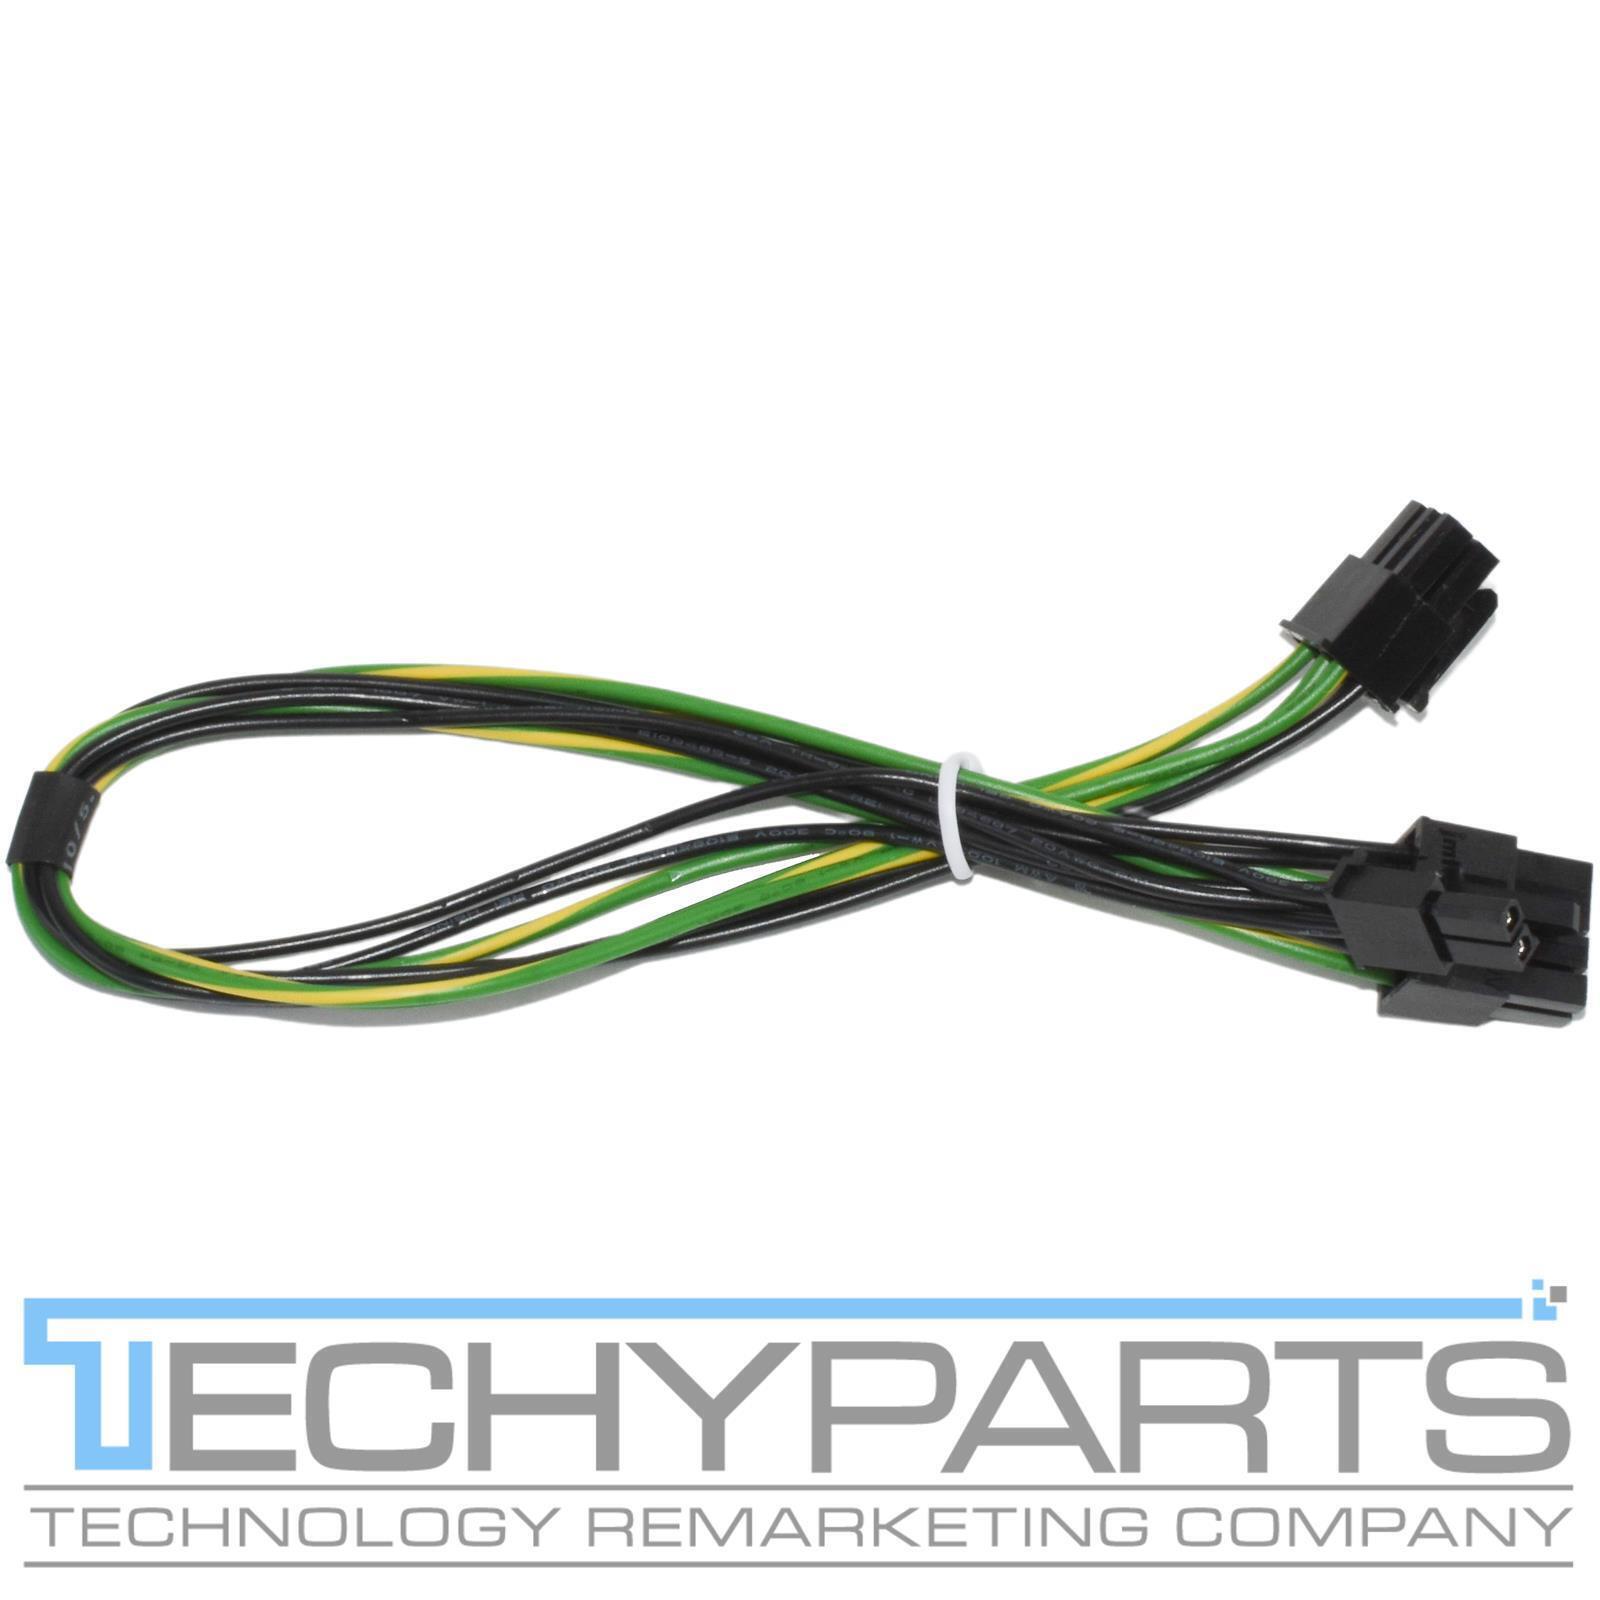 Supermicro CBL-0333L 6+2-pin to 8-pin GPU Power Extension Cable from M/B 30 cm